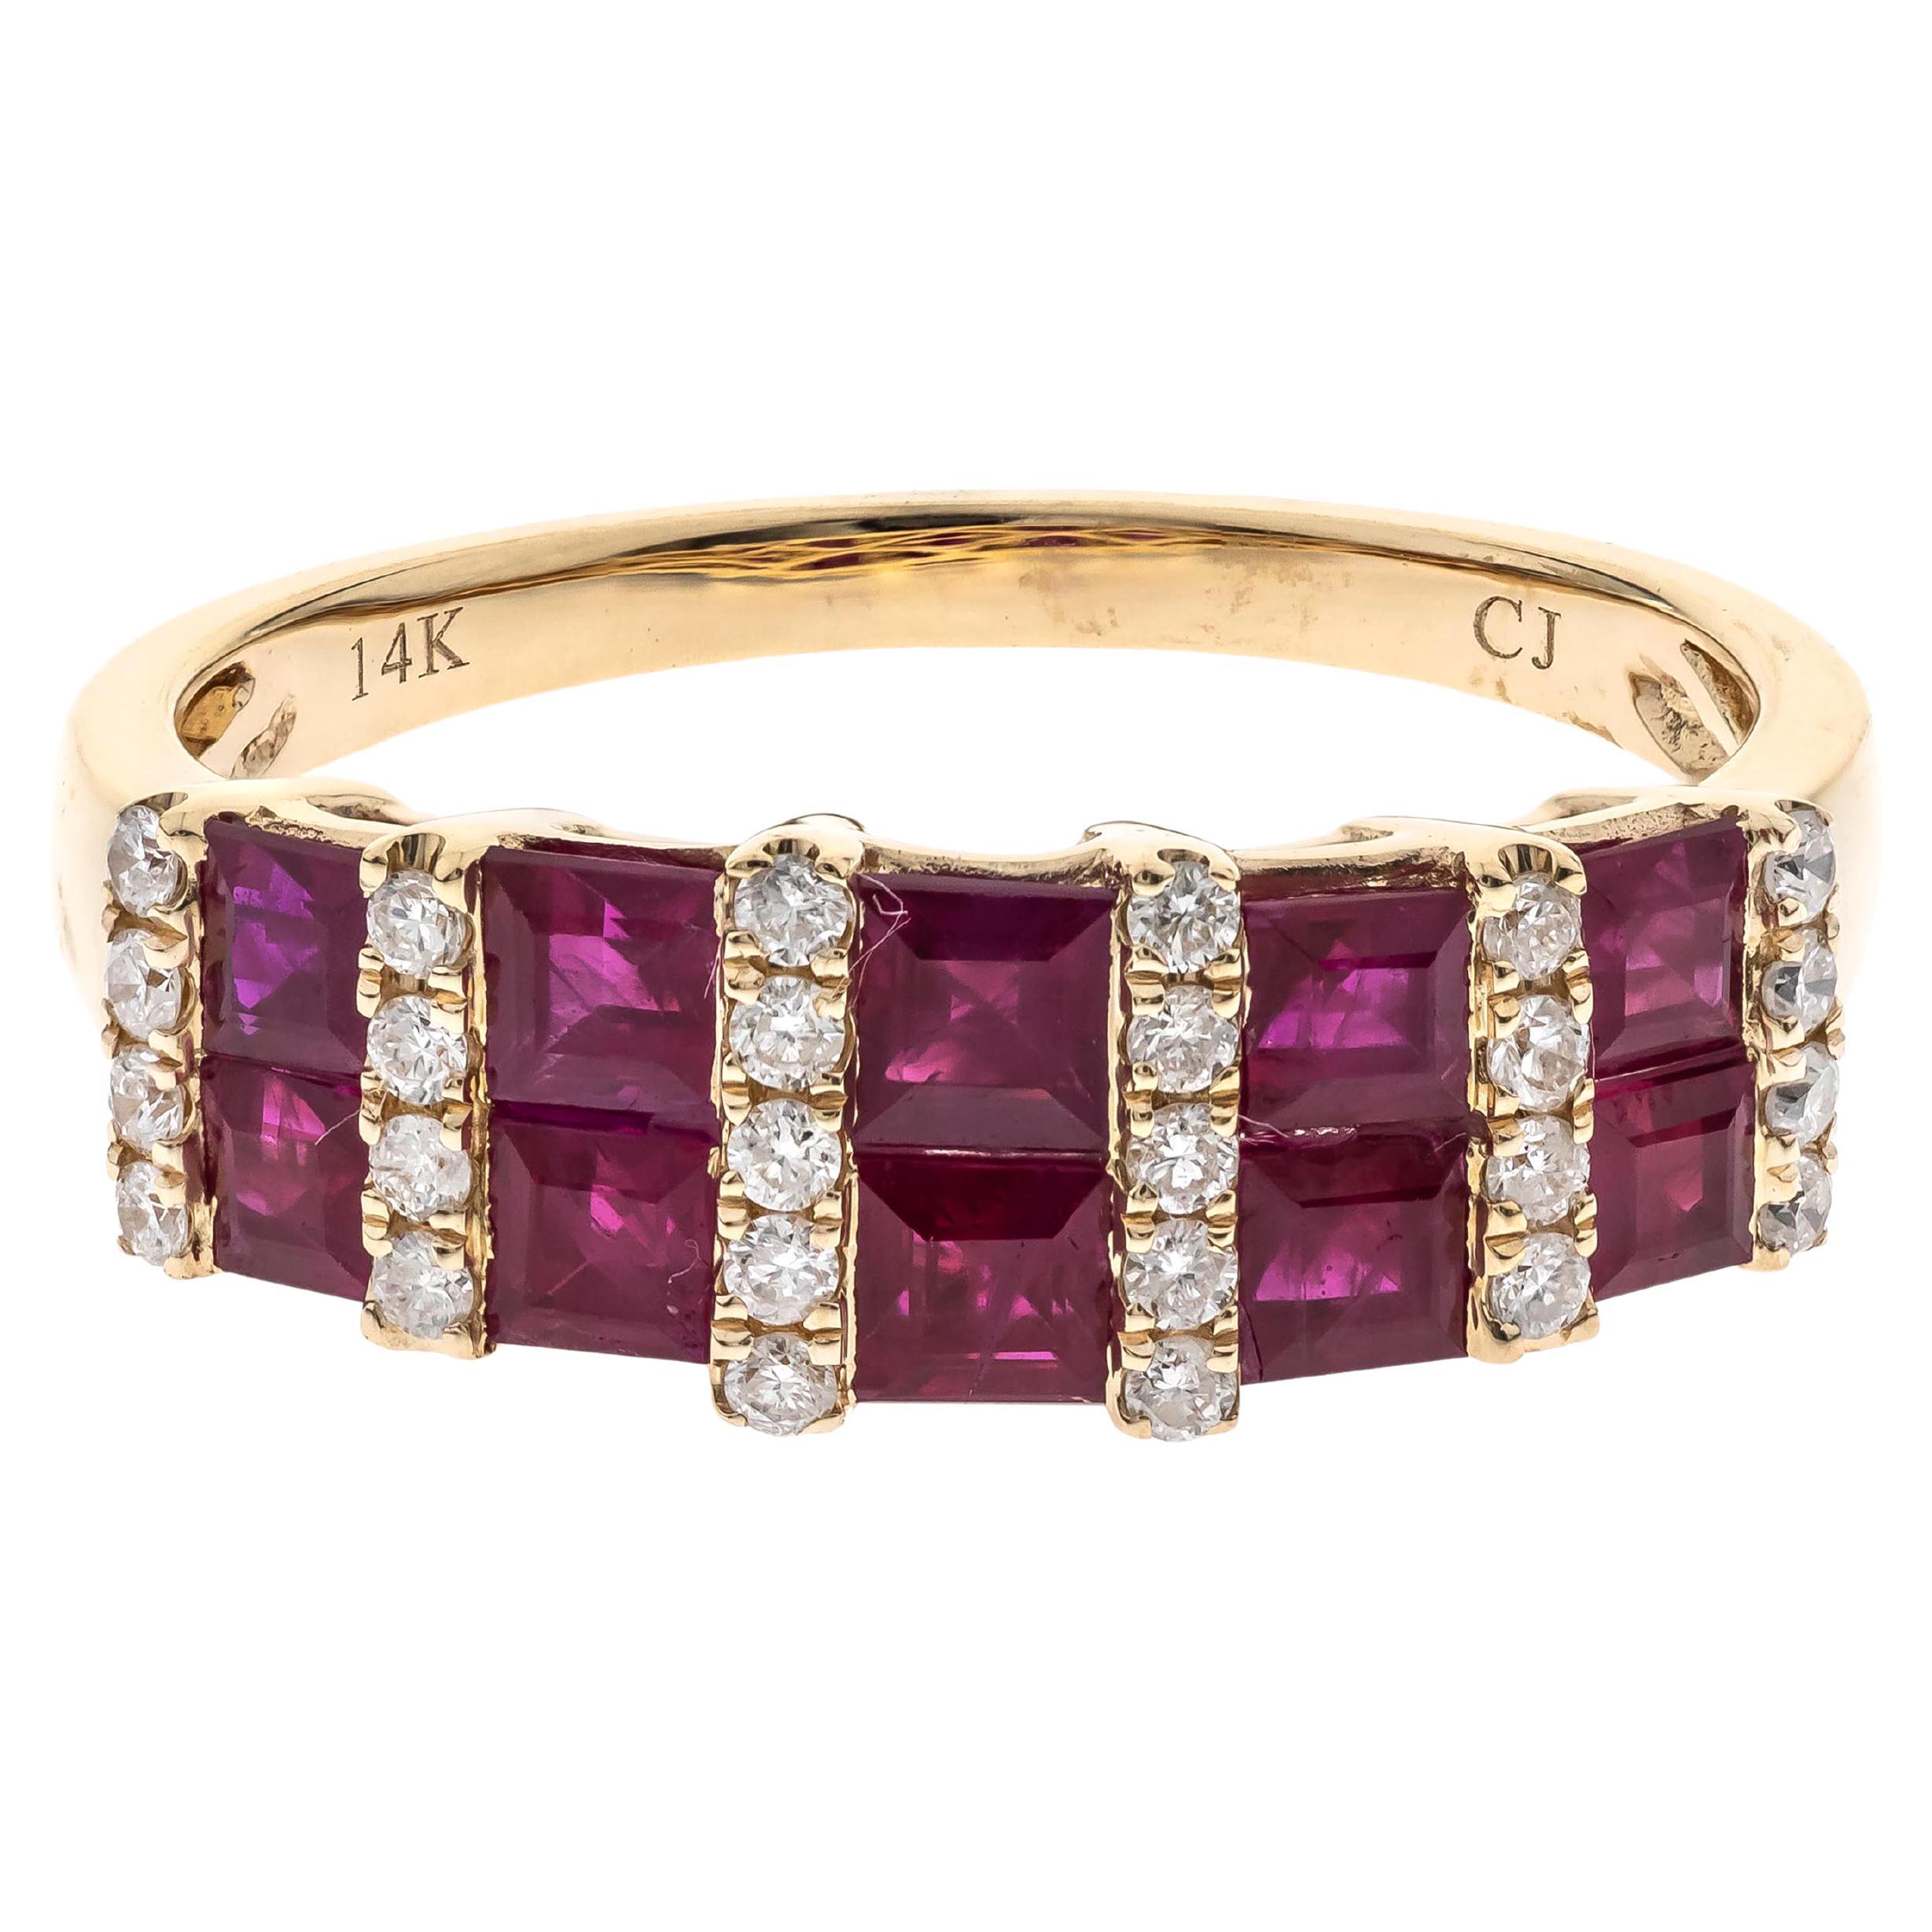 1.54 Carat Oval Ruby and Diamond Platinum Ring For Sale at 1stDibs